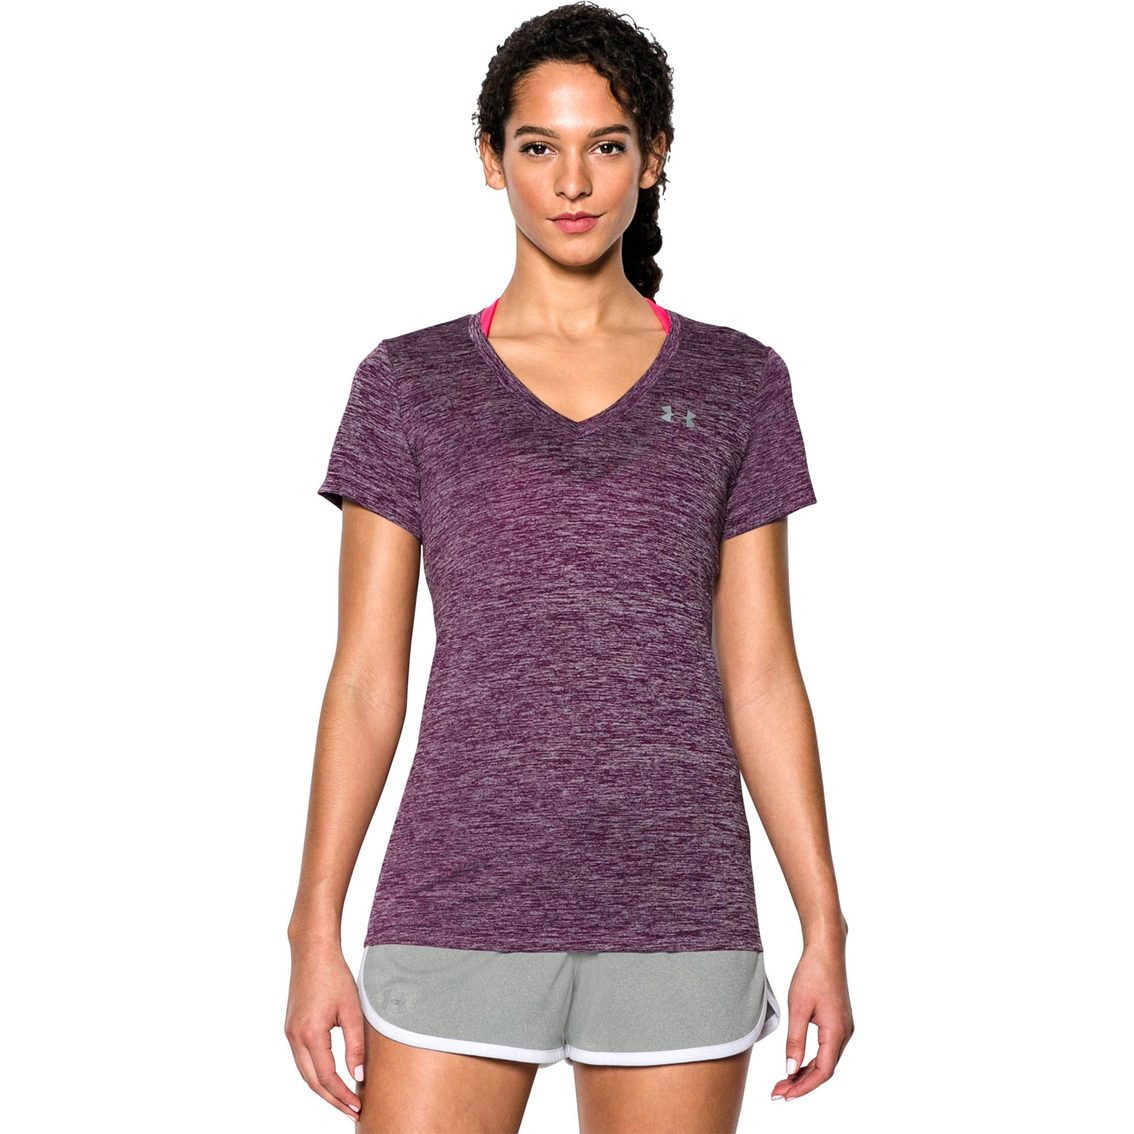 Under Armour Ua Twist Tech V Neck Tee | Tops | Clothing & Accessories ...